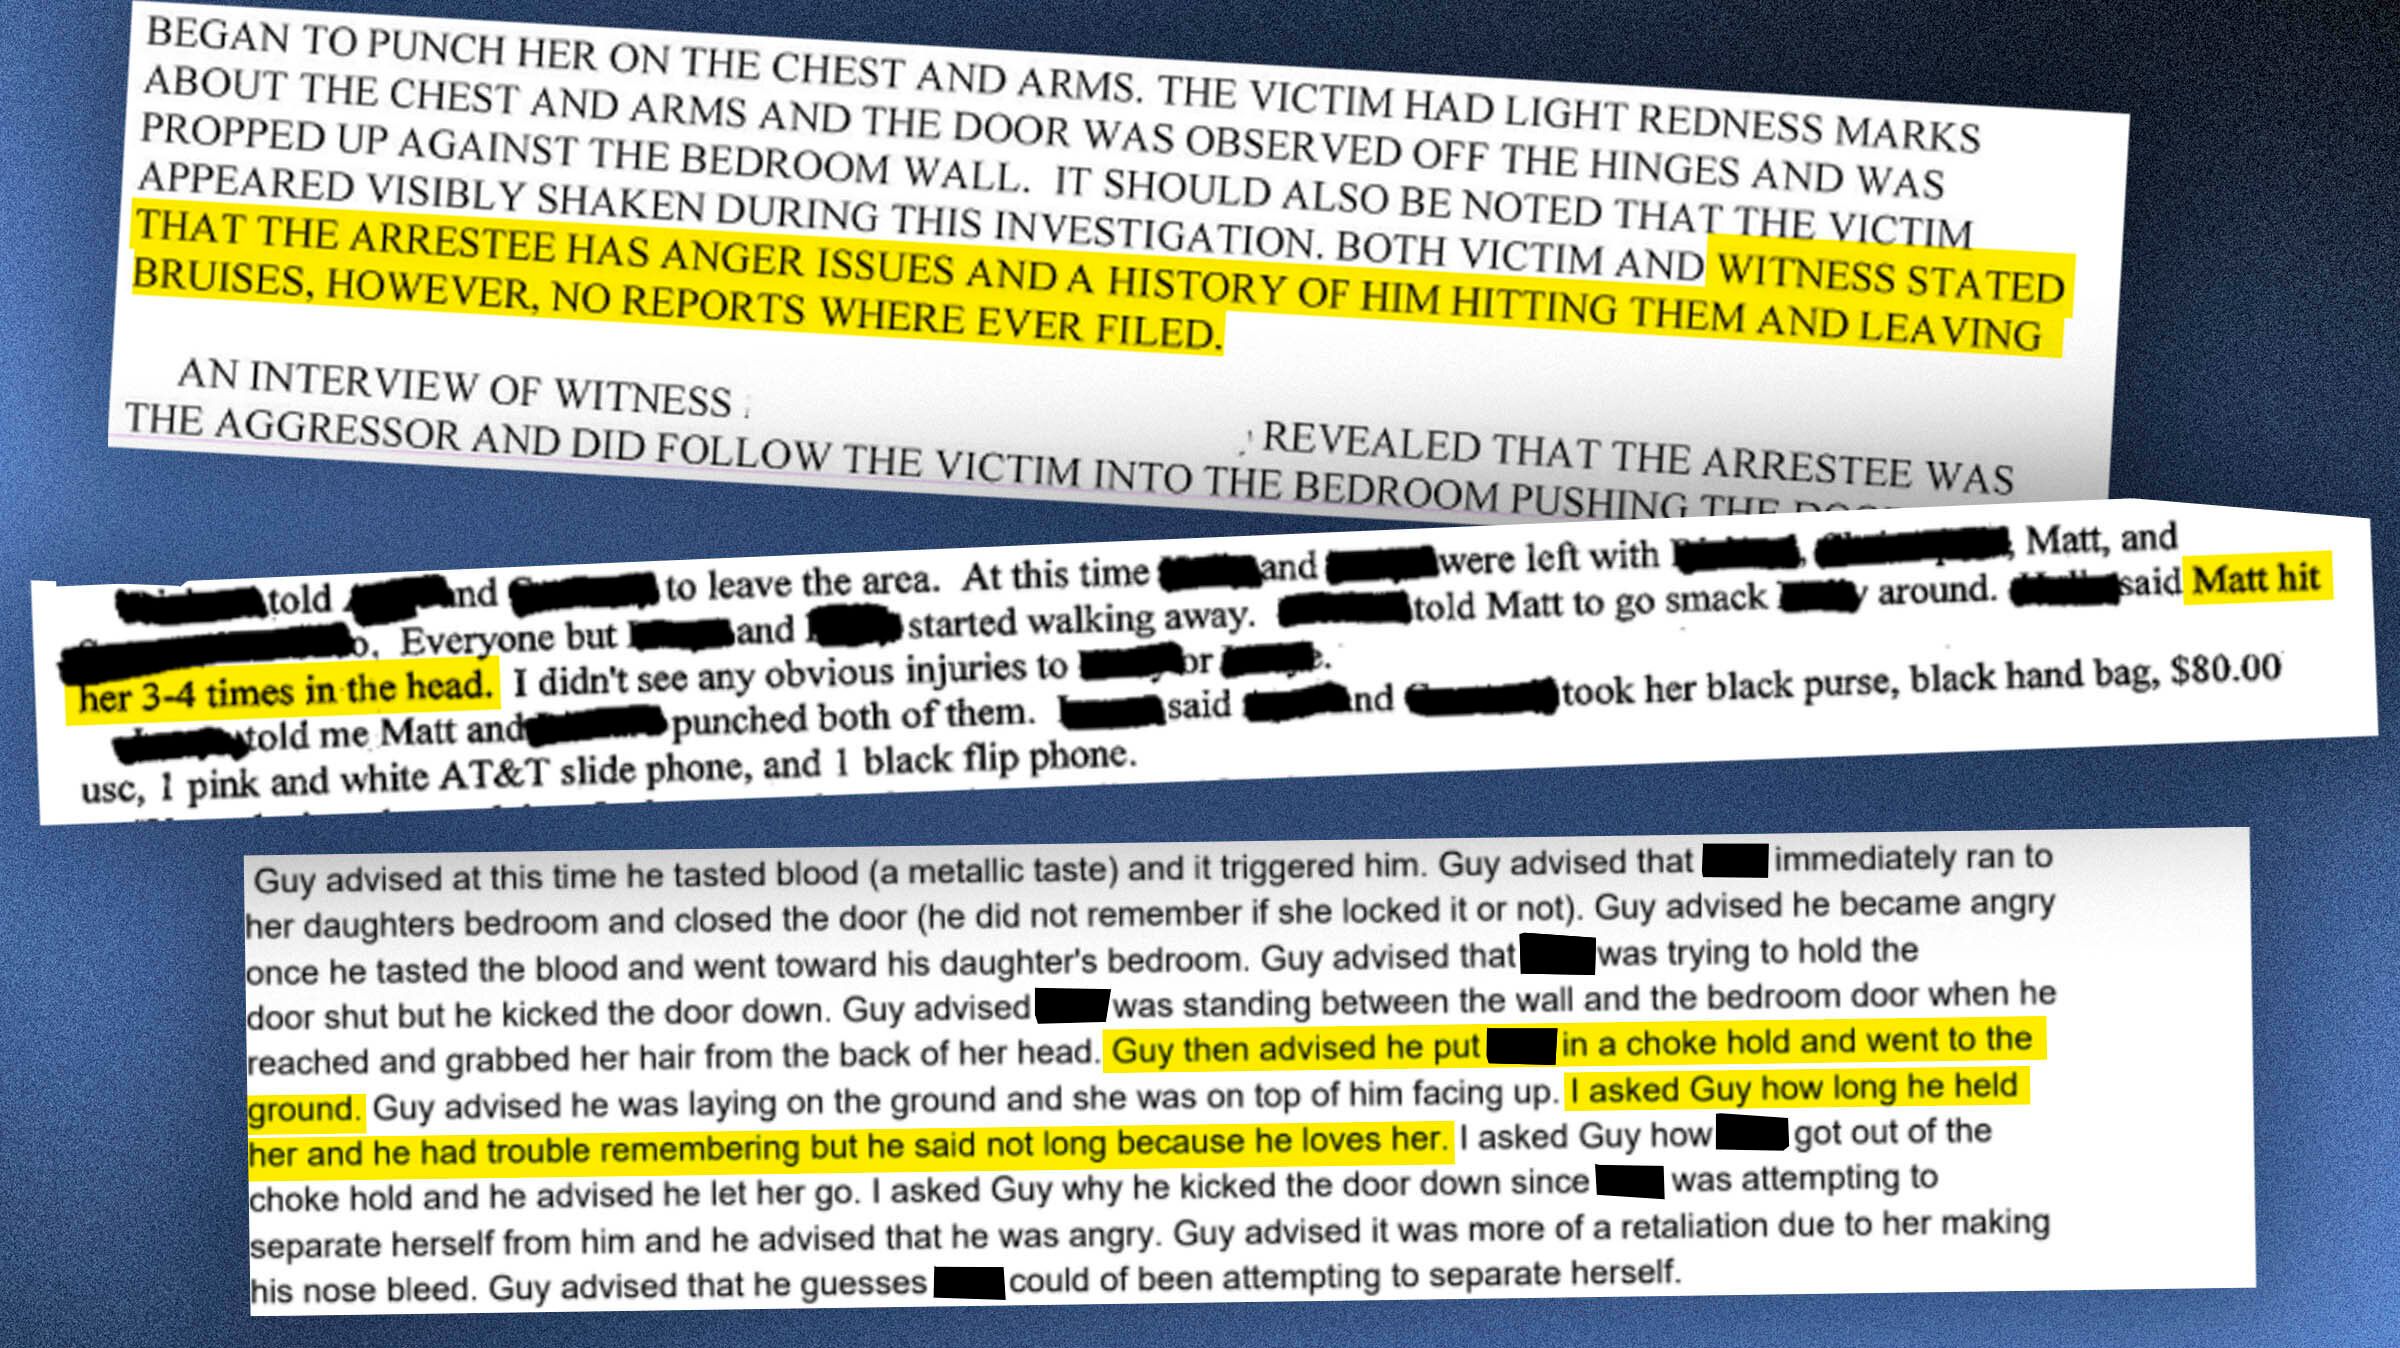 Screenshots of past police reports showing accusations and charges of violence against women. "I asked Guy how long he held h